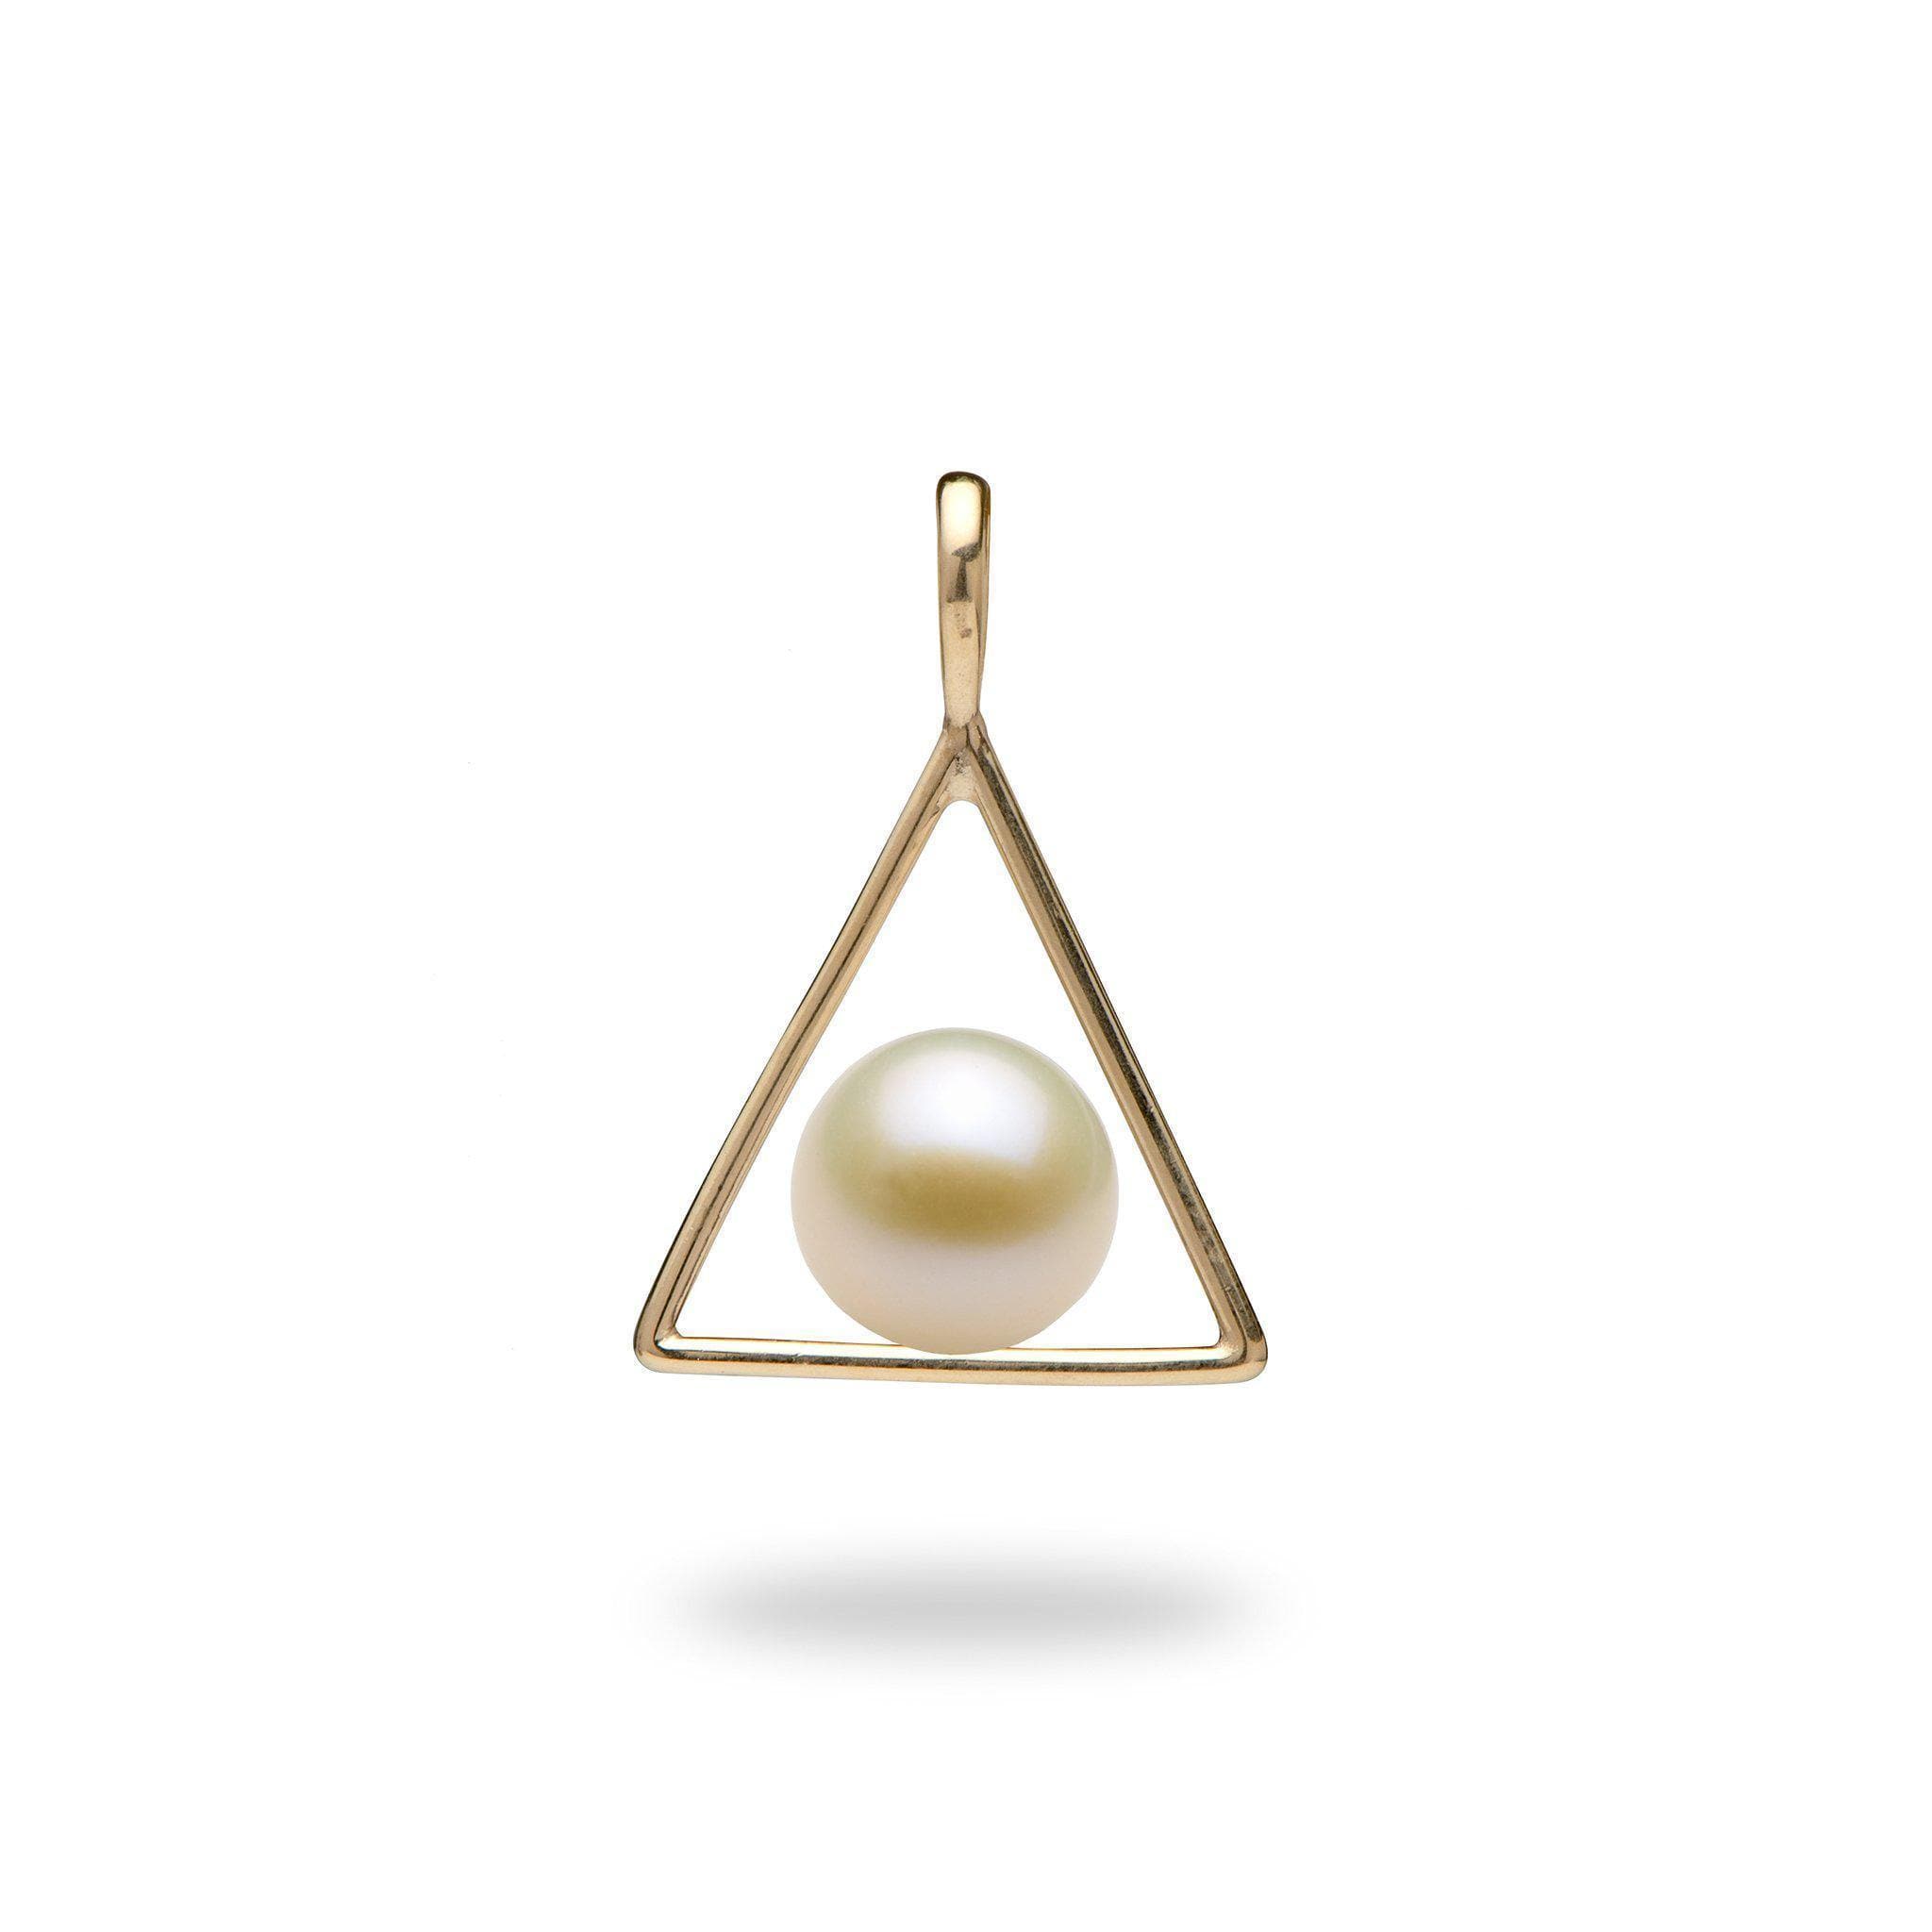 Triangle Pendant Mounting in 10K Yellow Gold with White Pearl - Maui Divers Jewelry